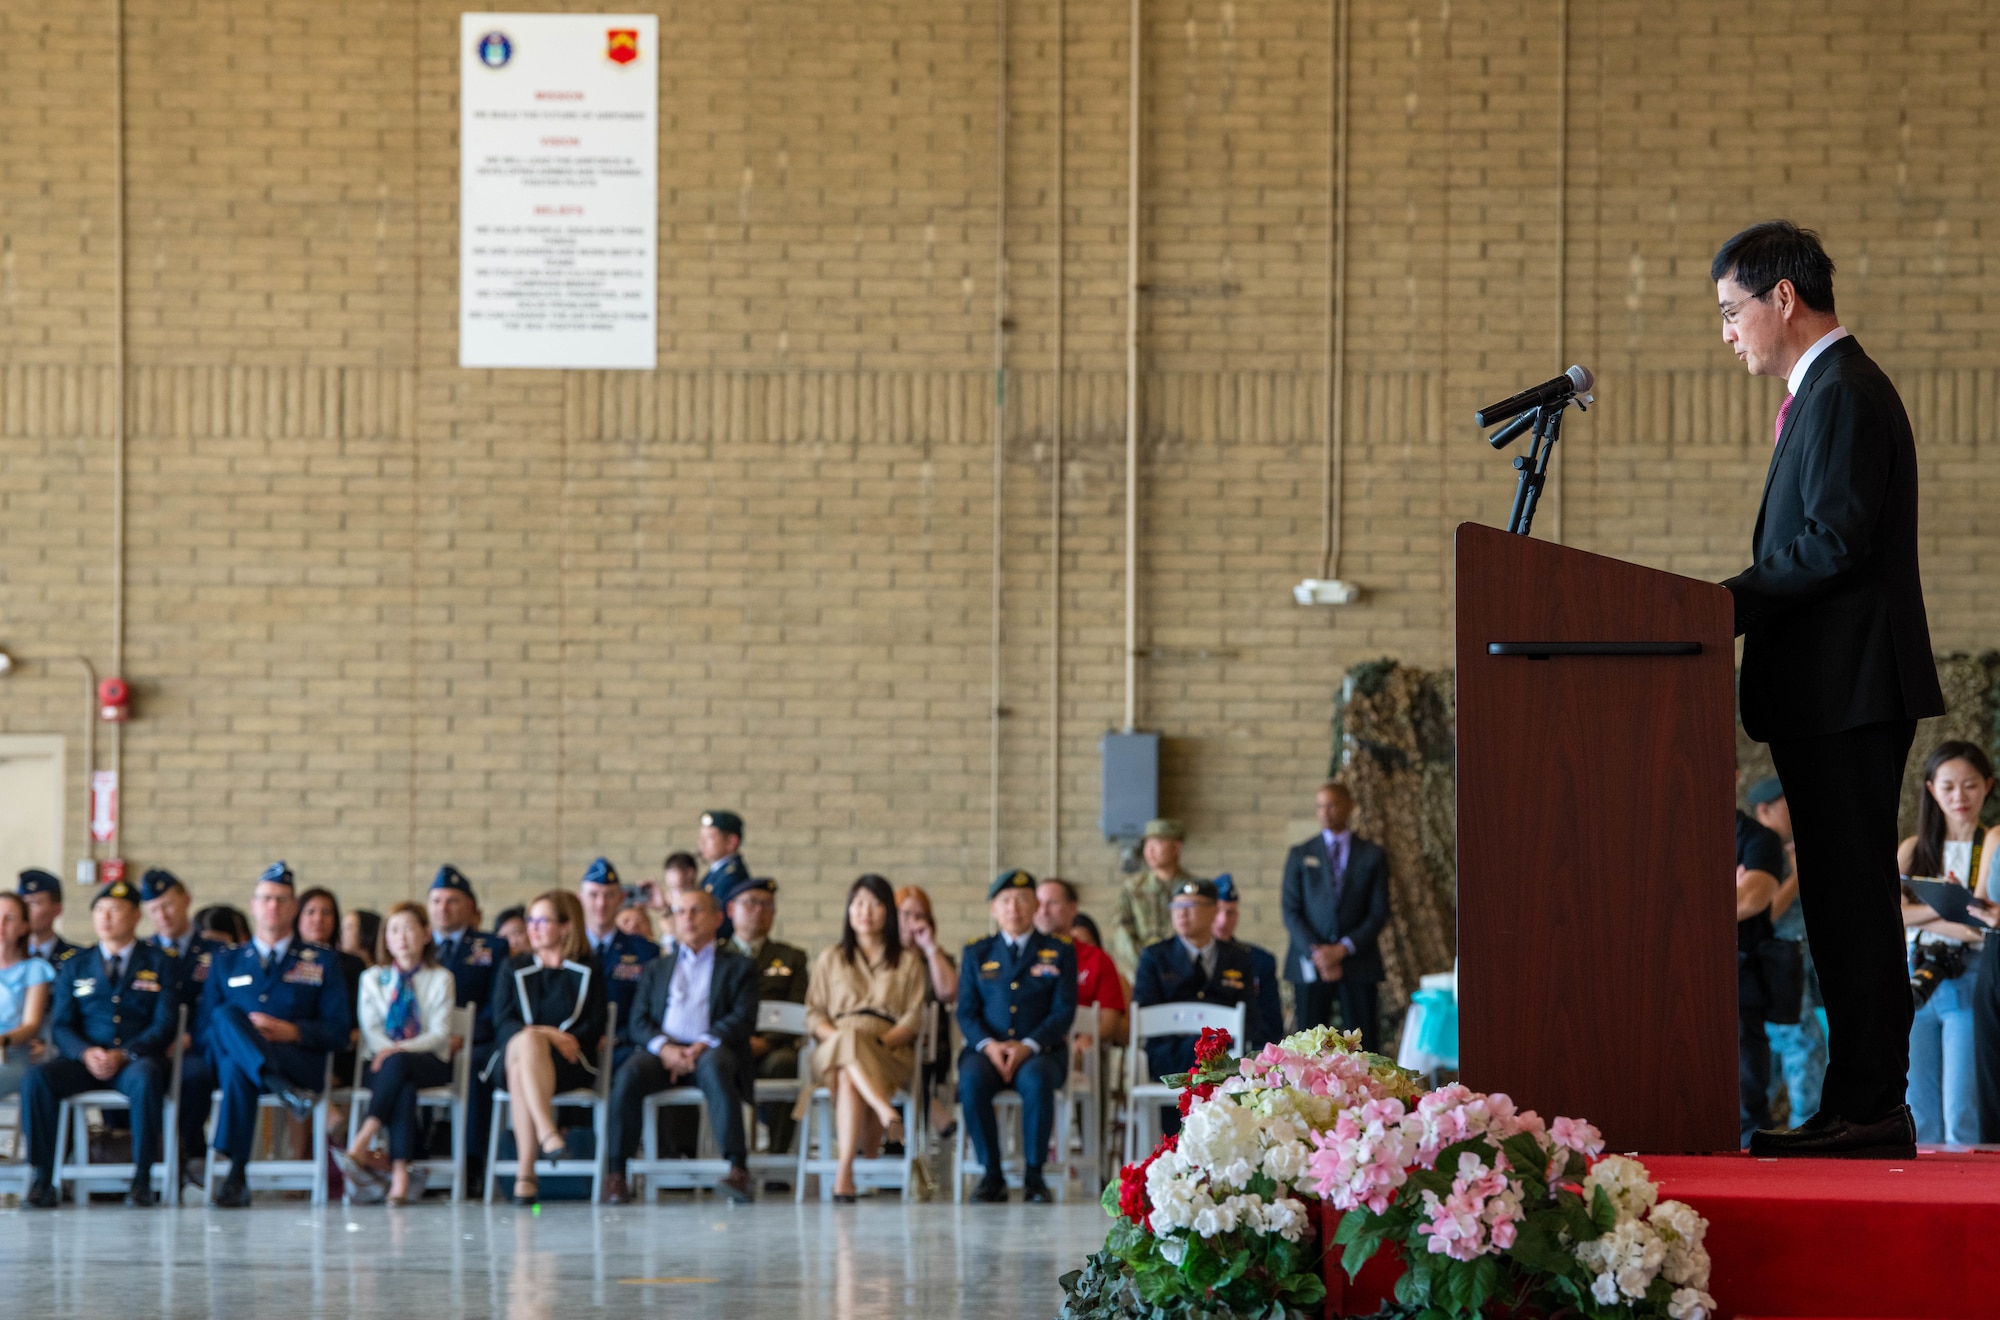 Heng Chee How, Republic of Singapore Senior Minister of State for Defence, gives a speech during the Republic of Singapore Air Force Peace Carvin II 30th Anniversary celebration event, April 25, 2023, at Luke Air Force Base, Arizona.